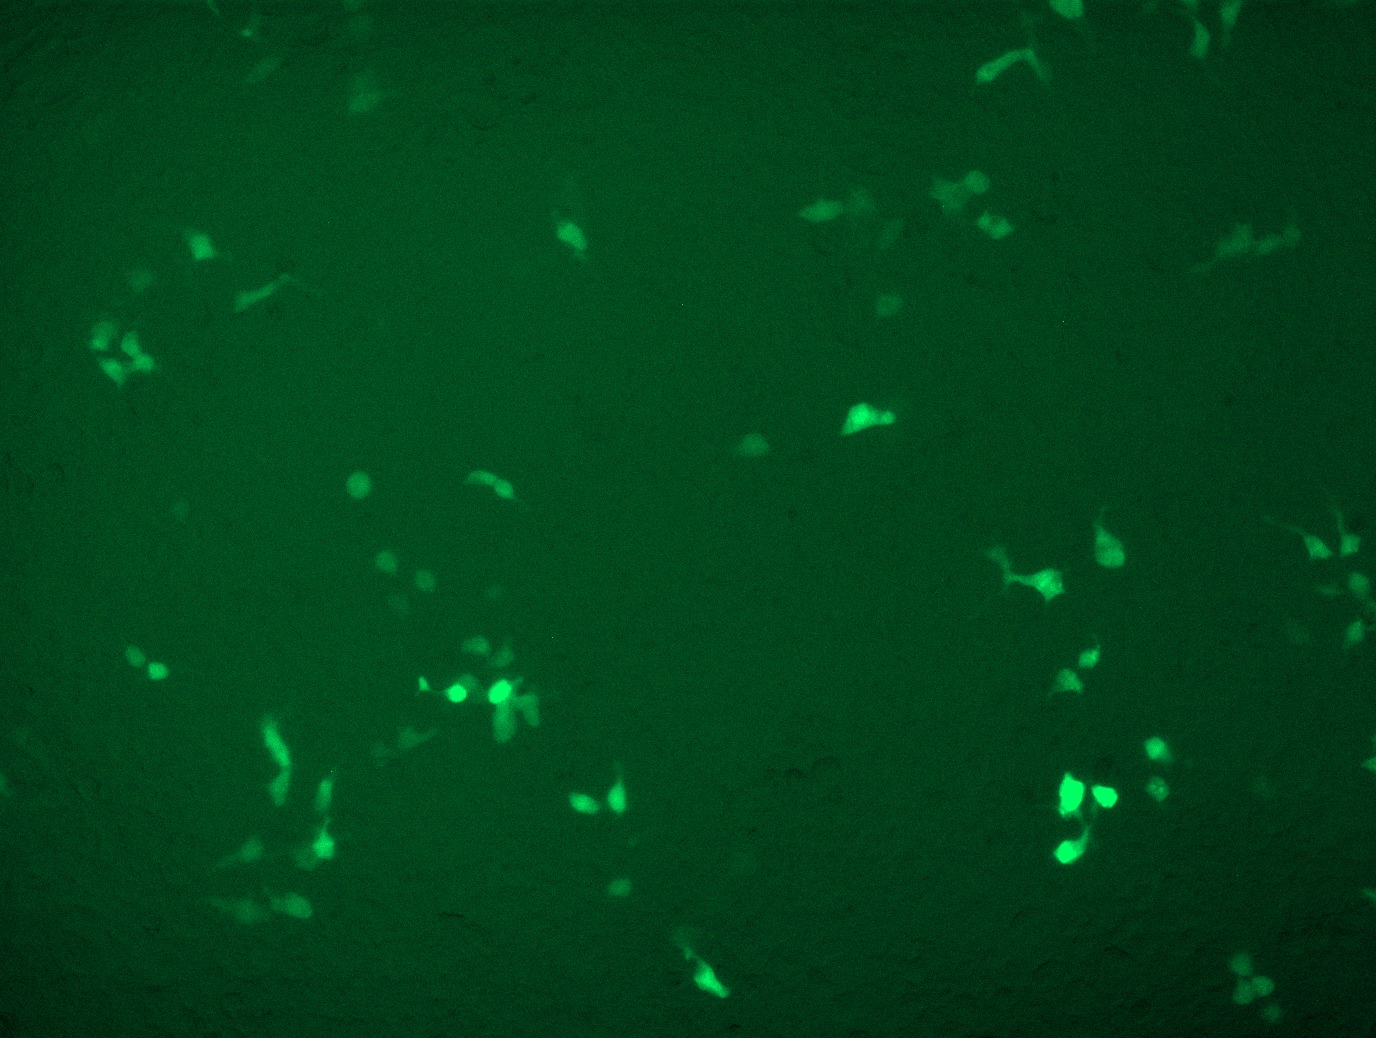 GFP signal was observed under microscope at 48 hours after transduction of TL300029A virus into HEK293 cells. TL300029A virus was prepared using lenti-shRNA TL300029A and TR30037 packaging kit.